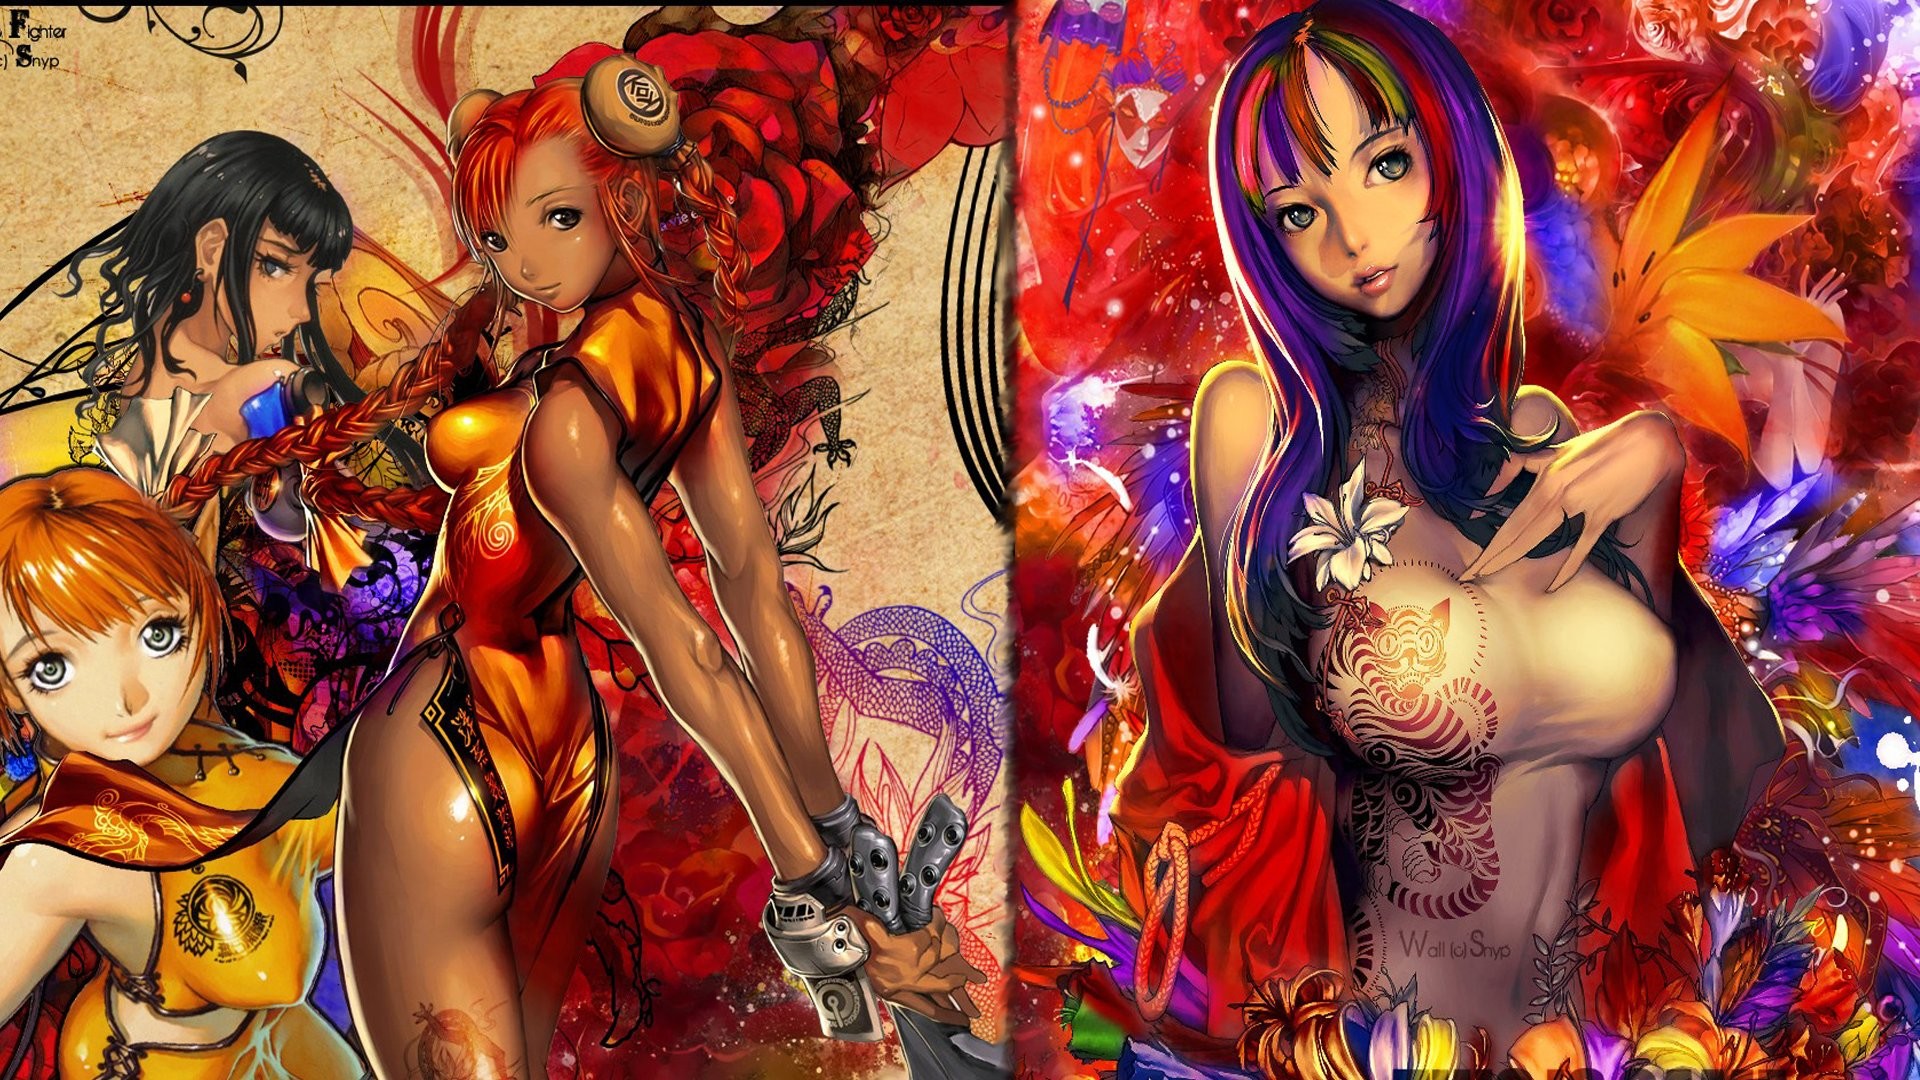 1920x1080 ... Anime Film - YouTube Blade and soul clipart 1080p collection ...